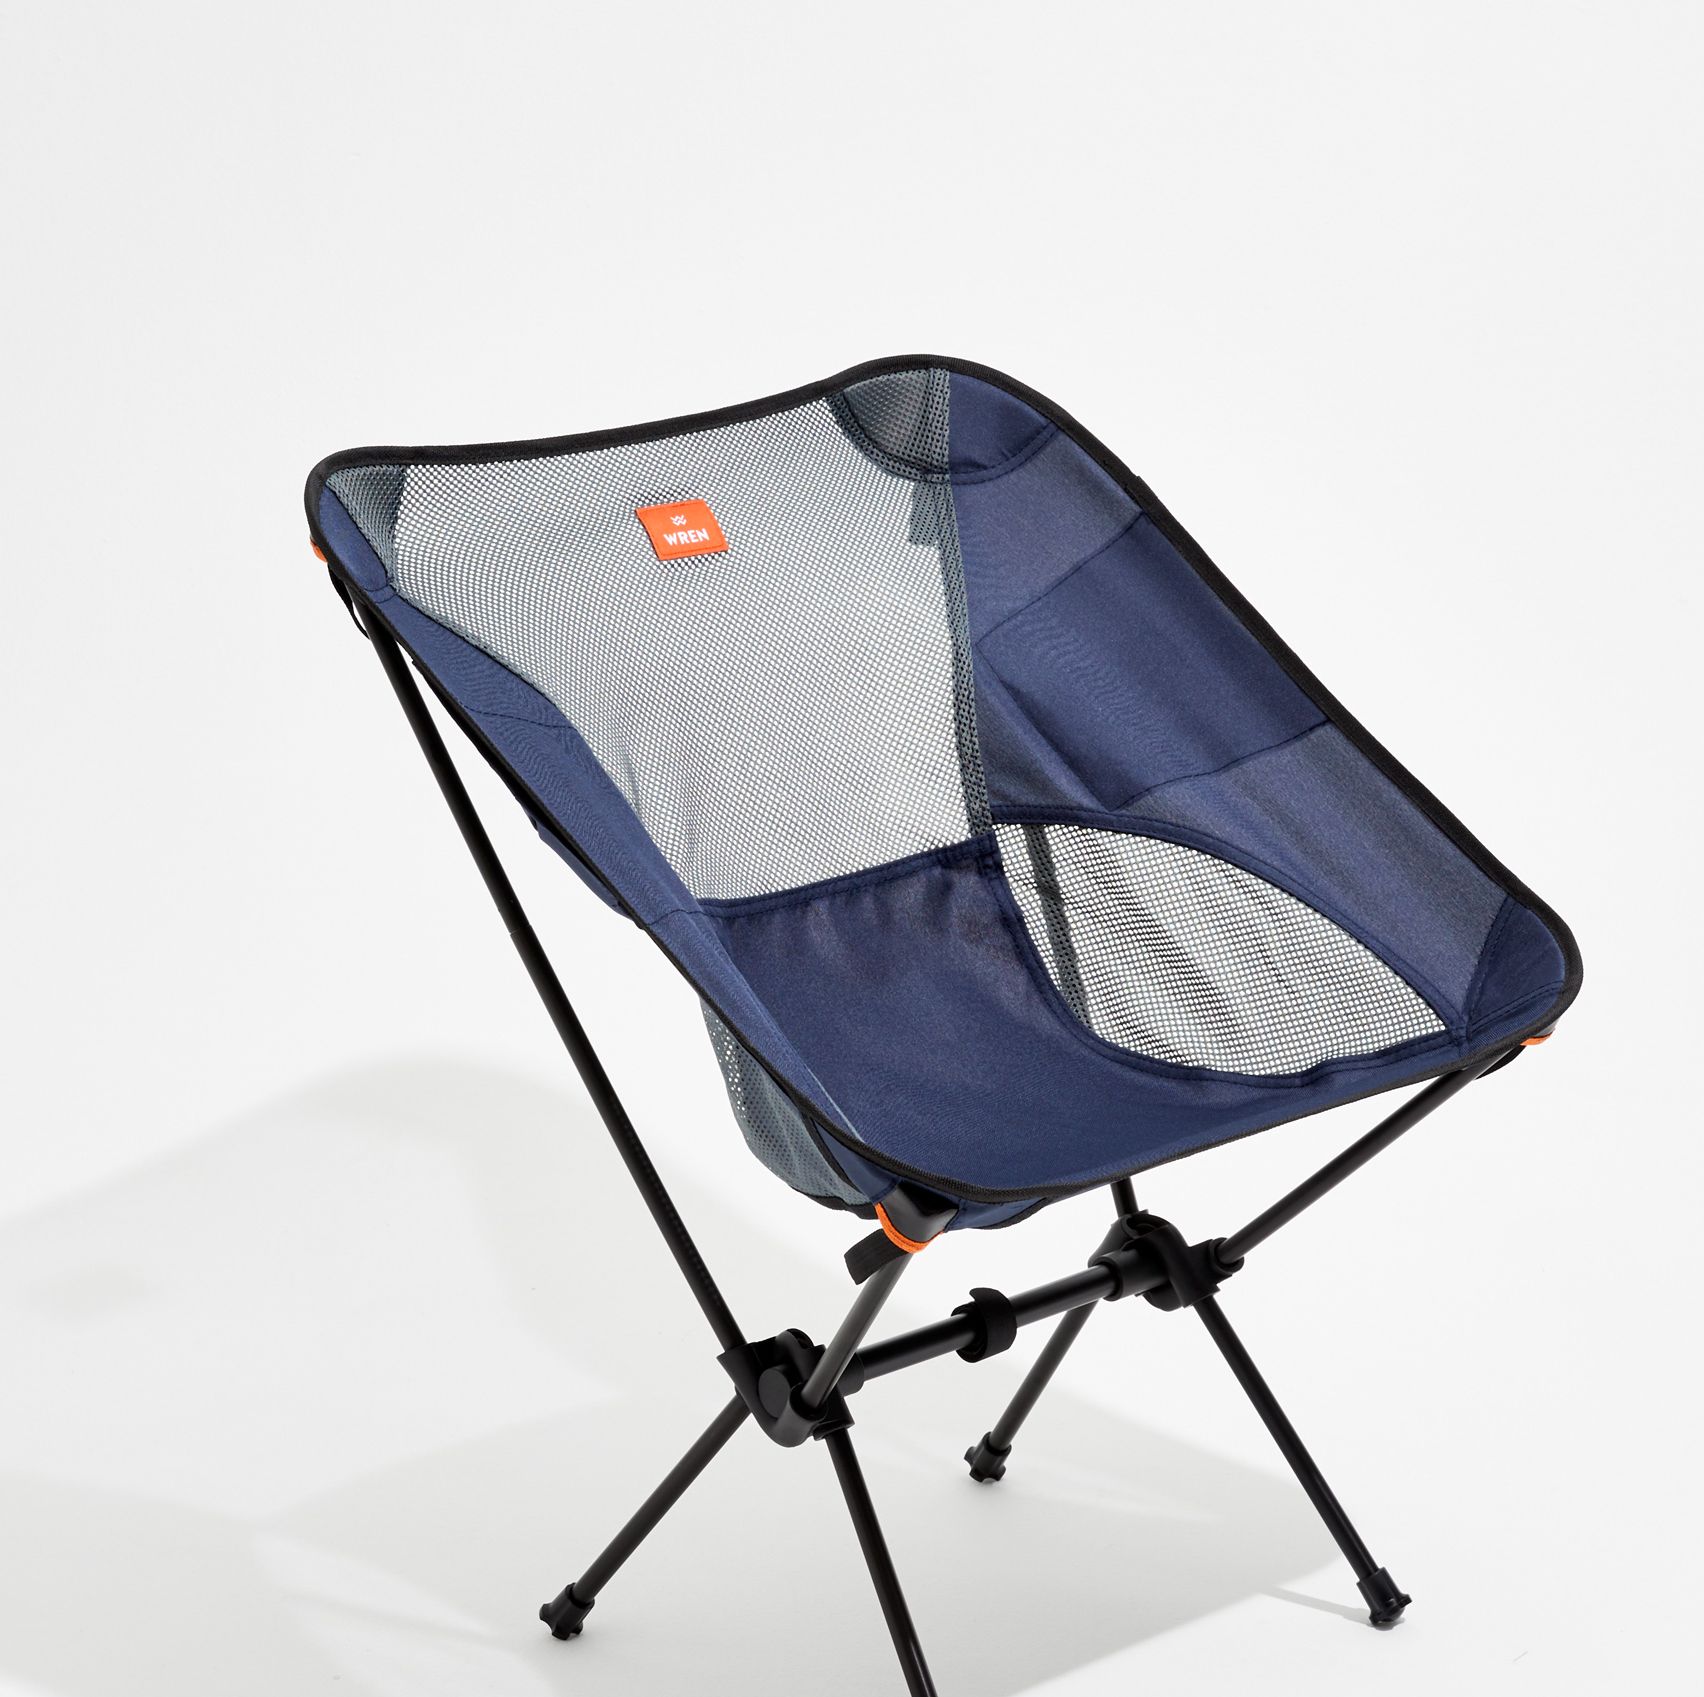 Wren's Comfy Camp Chair Is an Impressively Packable Triumph